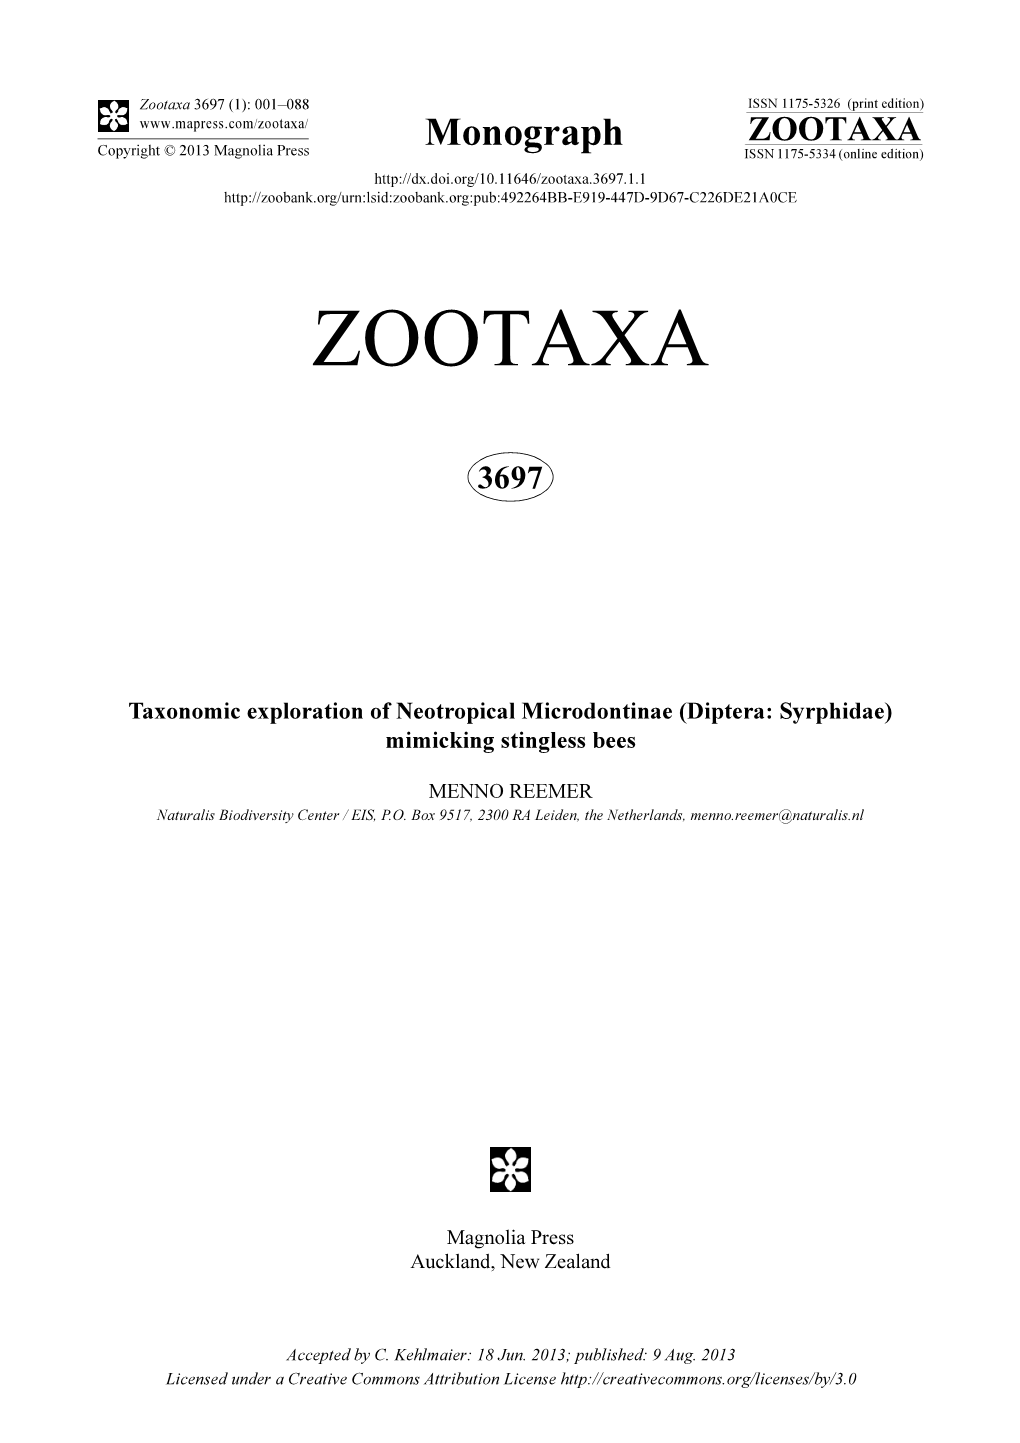 Taxonomic Exploration of Neotropical Microdontinae (Diptera: Syrphidae) Mimicking Stingless Bees